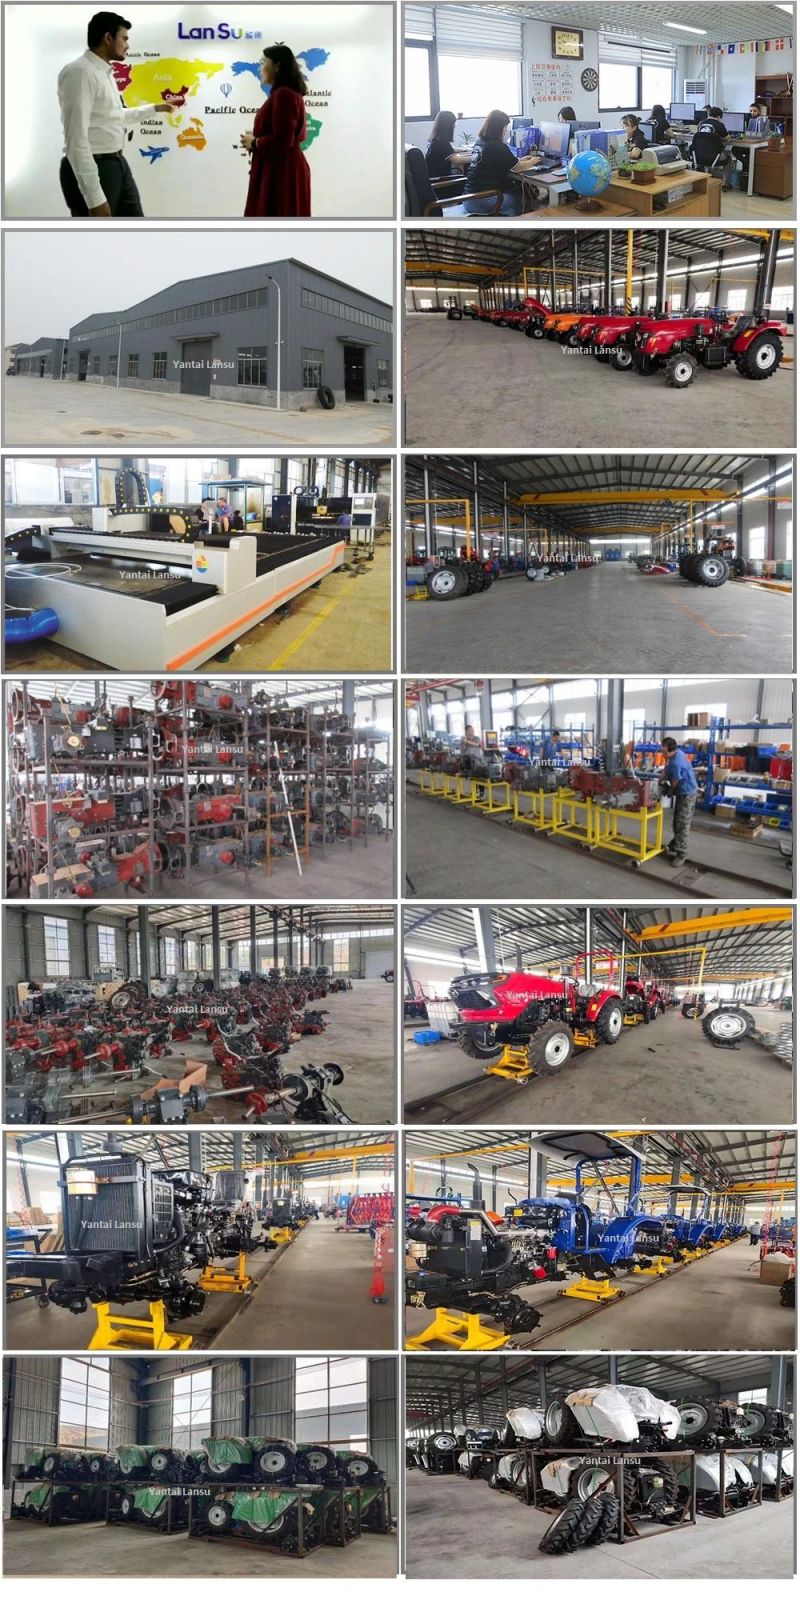 Hot Sale Factory Supply Chinese 40HP 4WD Farm/Mini/Diesel/Small Garden/Agricultural Tractor